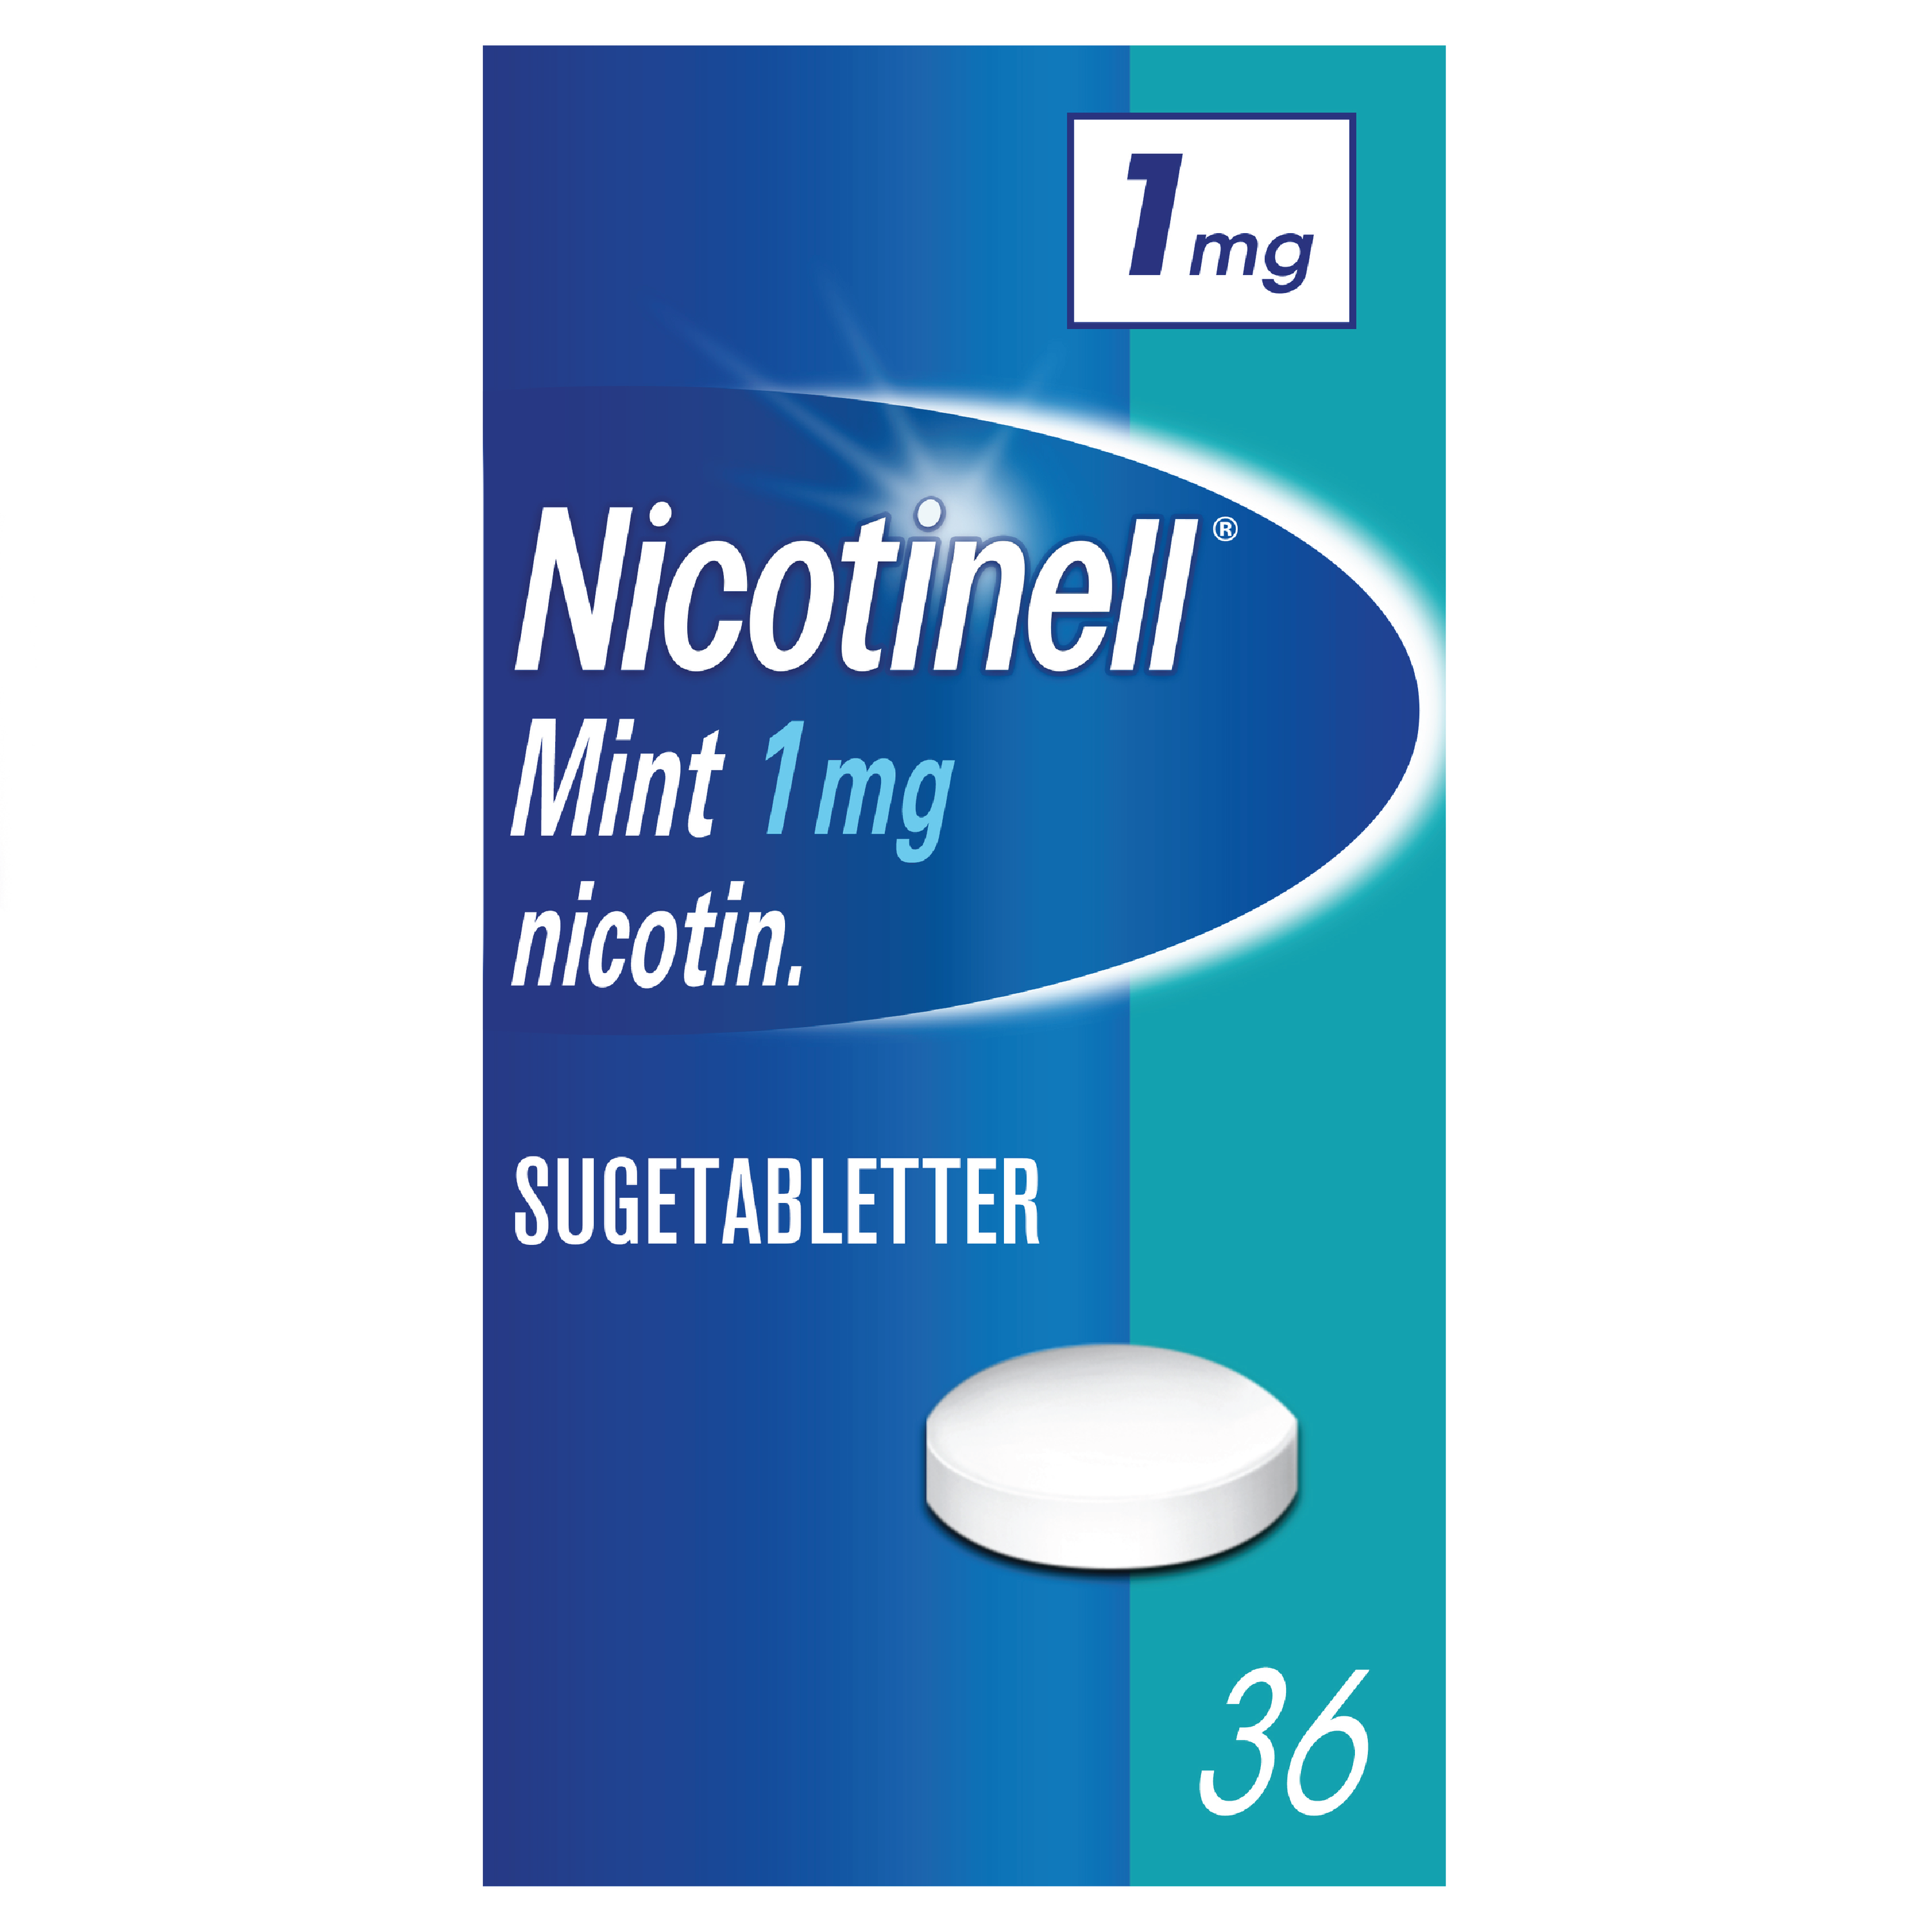 Nicotinell Sugetabletter 1mg, 36 stk.